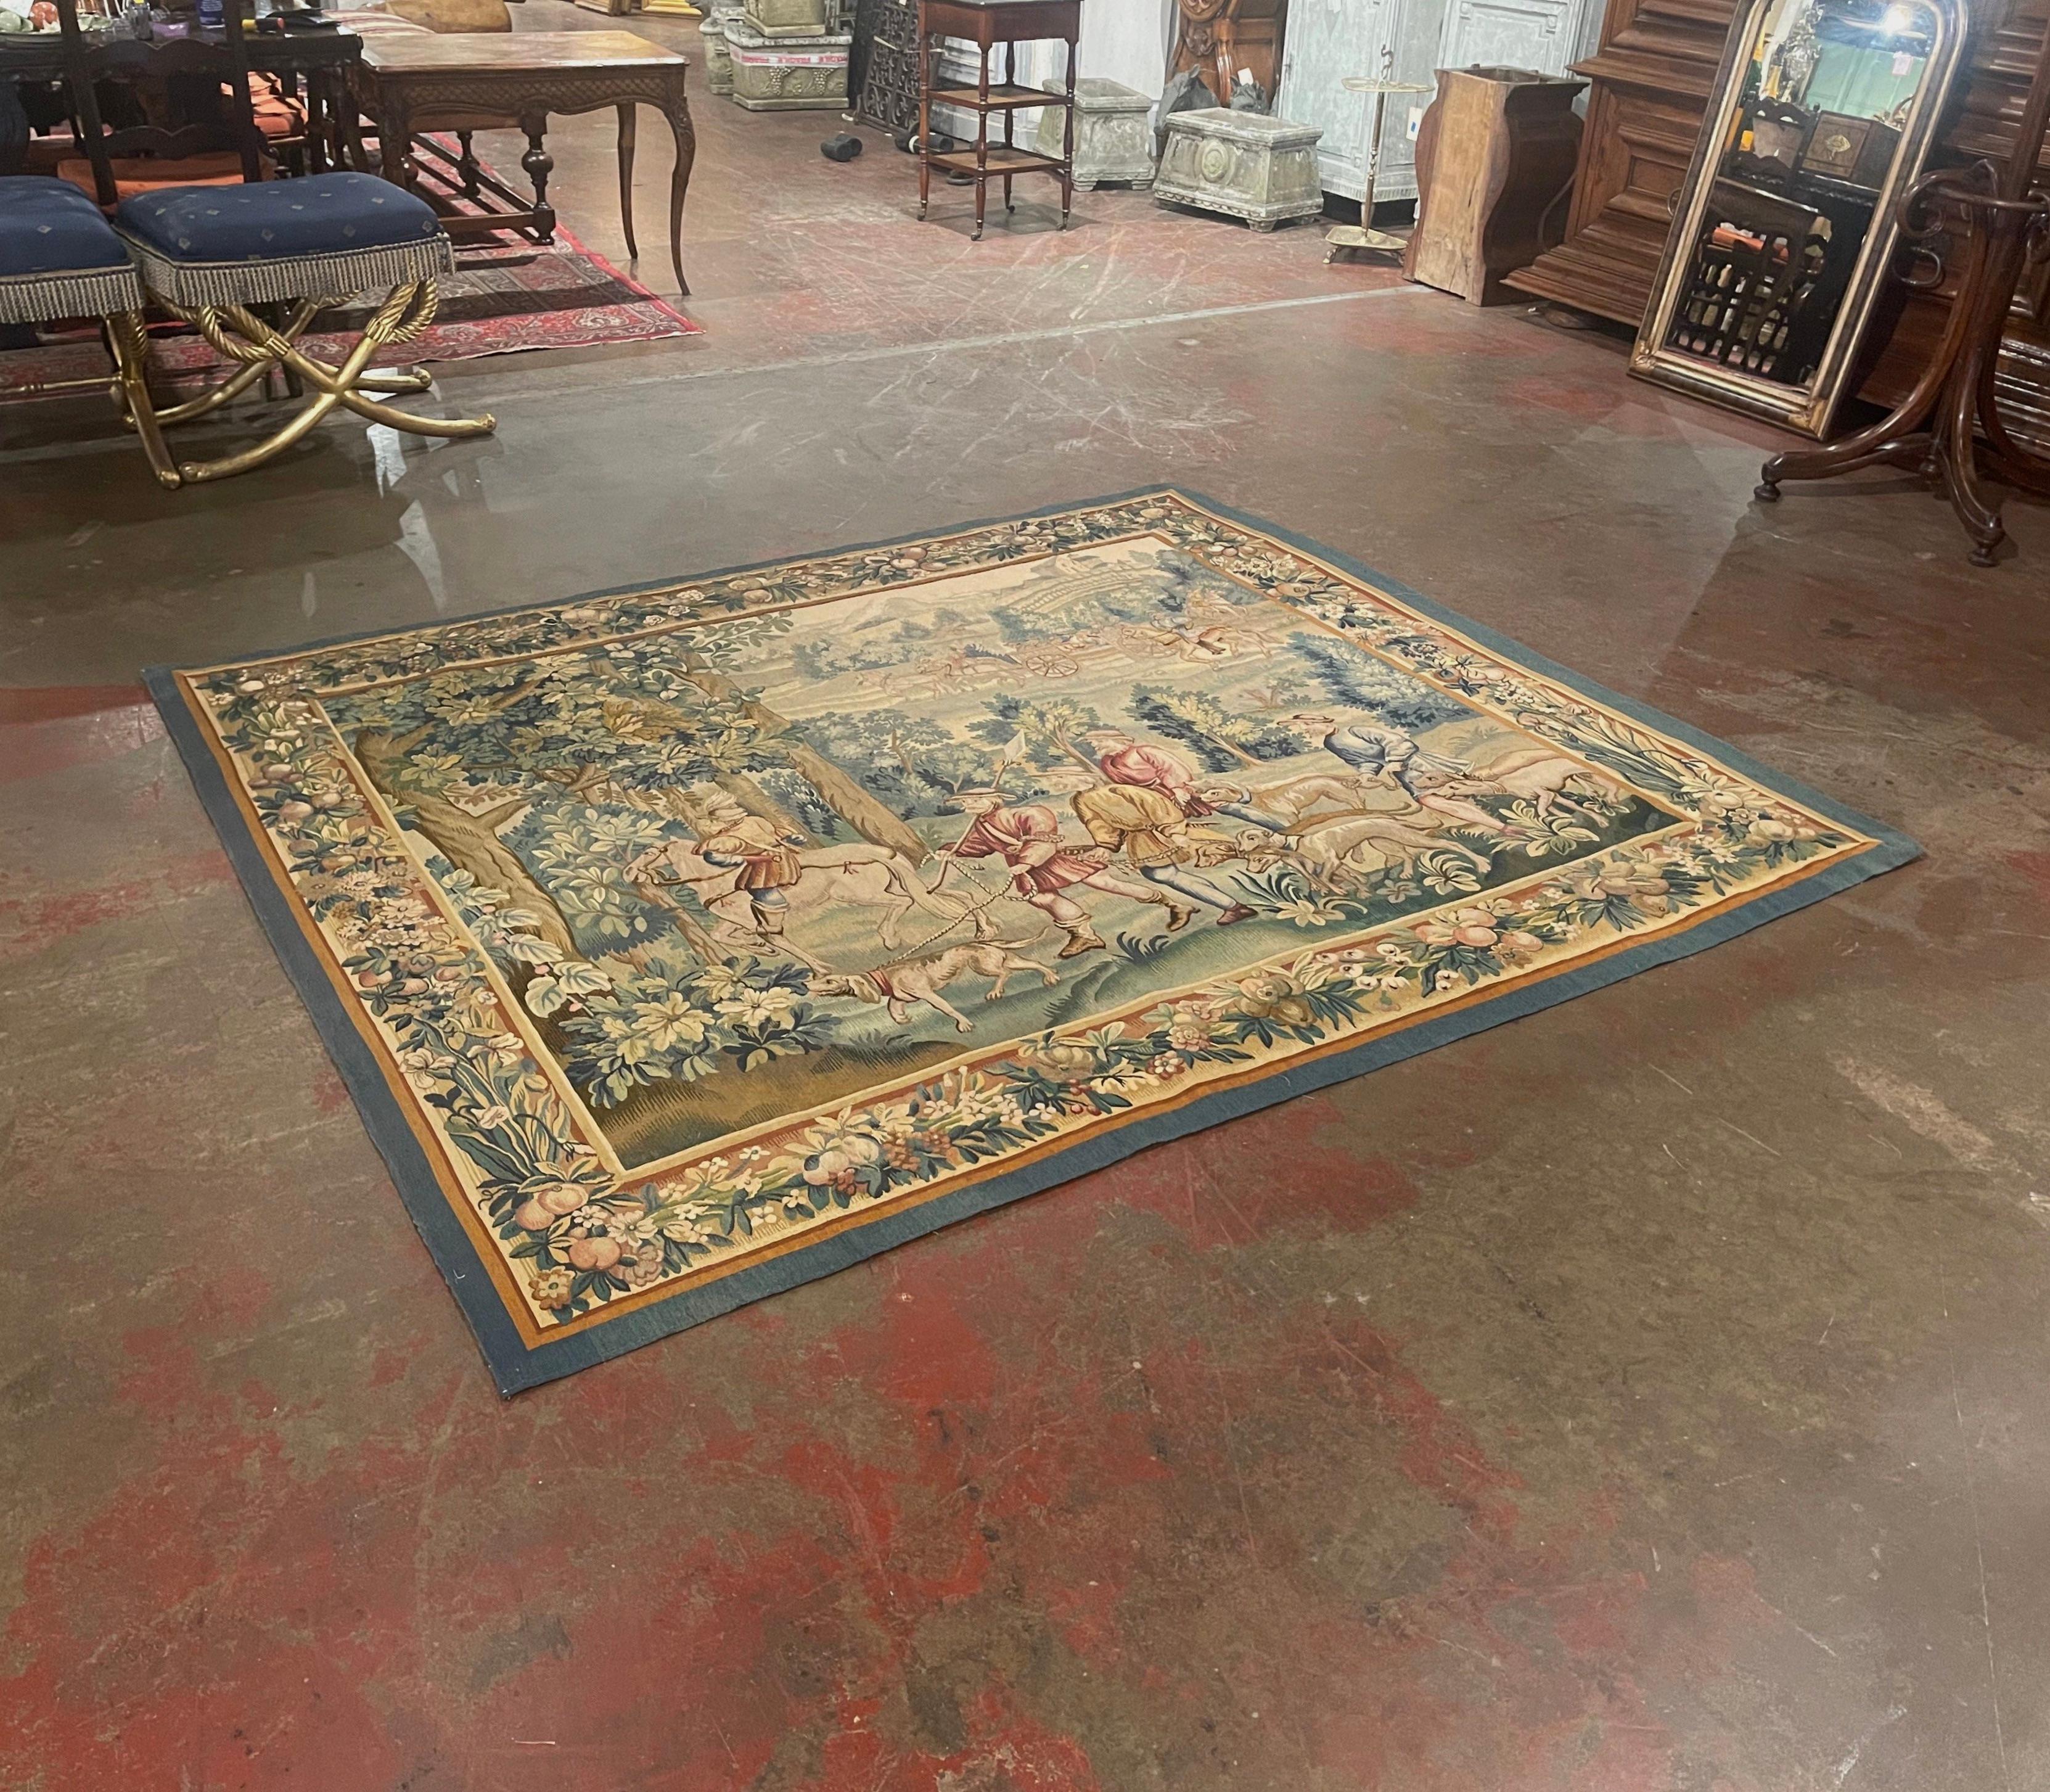 Decorate a wall or a staircase with this elegant and colorful antique hunt tapestry with original border. Handwoven in Aubusson, France circa 1880, the rectangular wall decor composition, depicts a landscape scenery with large trees and foliage